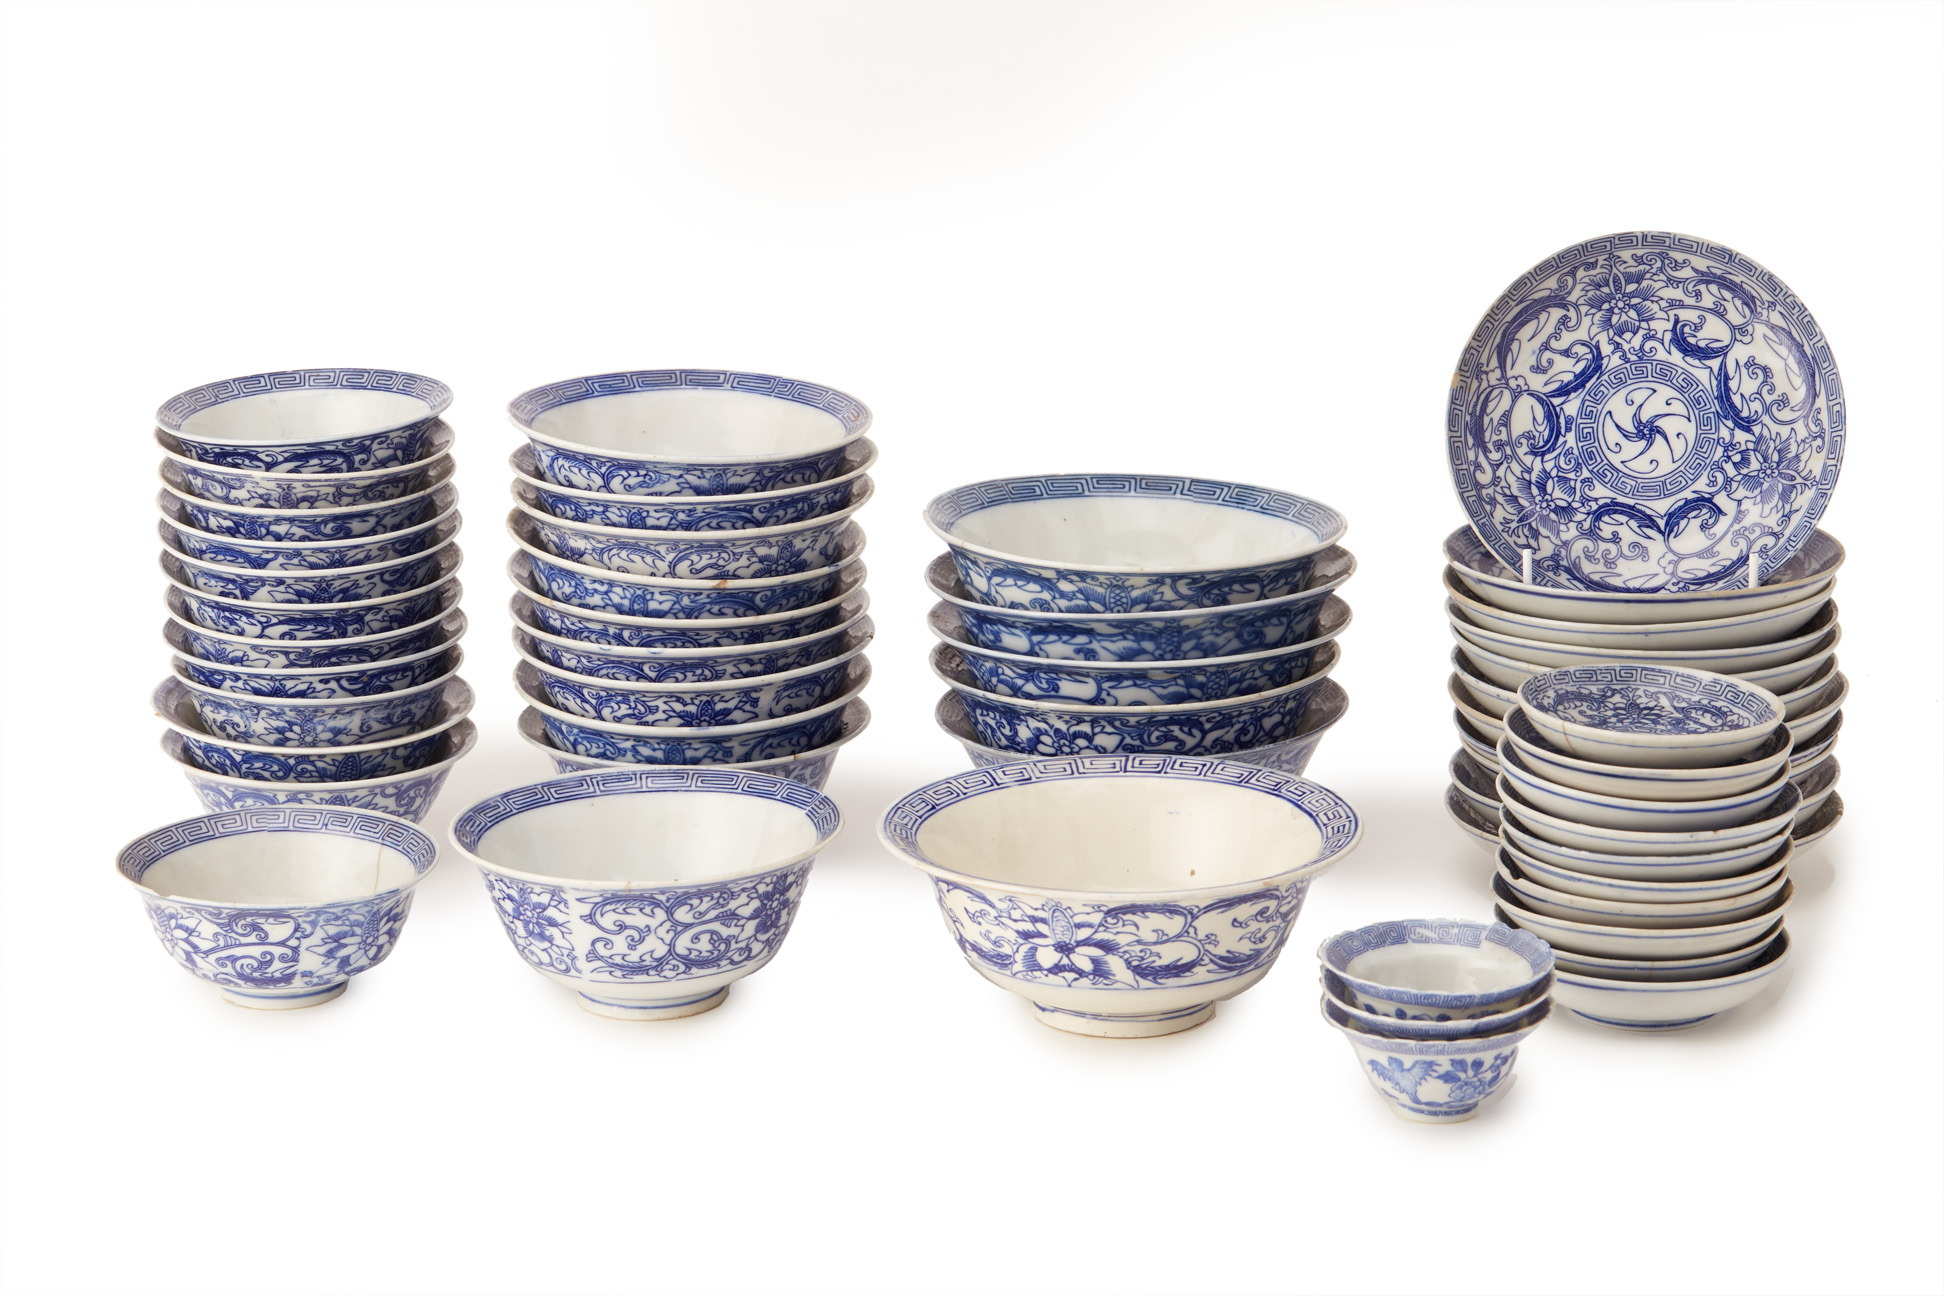 A LARGE GROUP OF BLUE AND WHITE PORCELAIN BOWLS